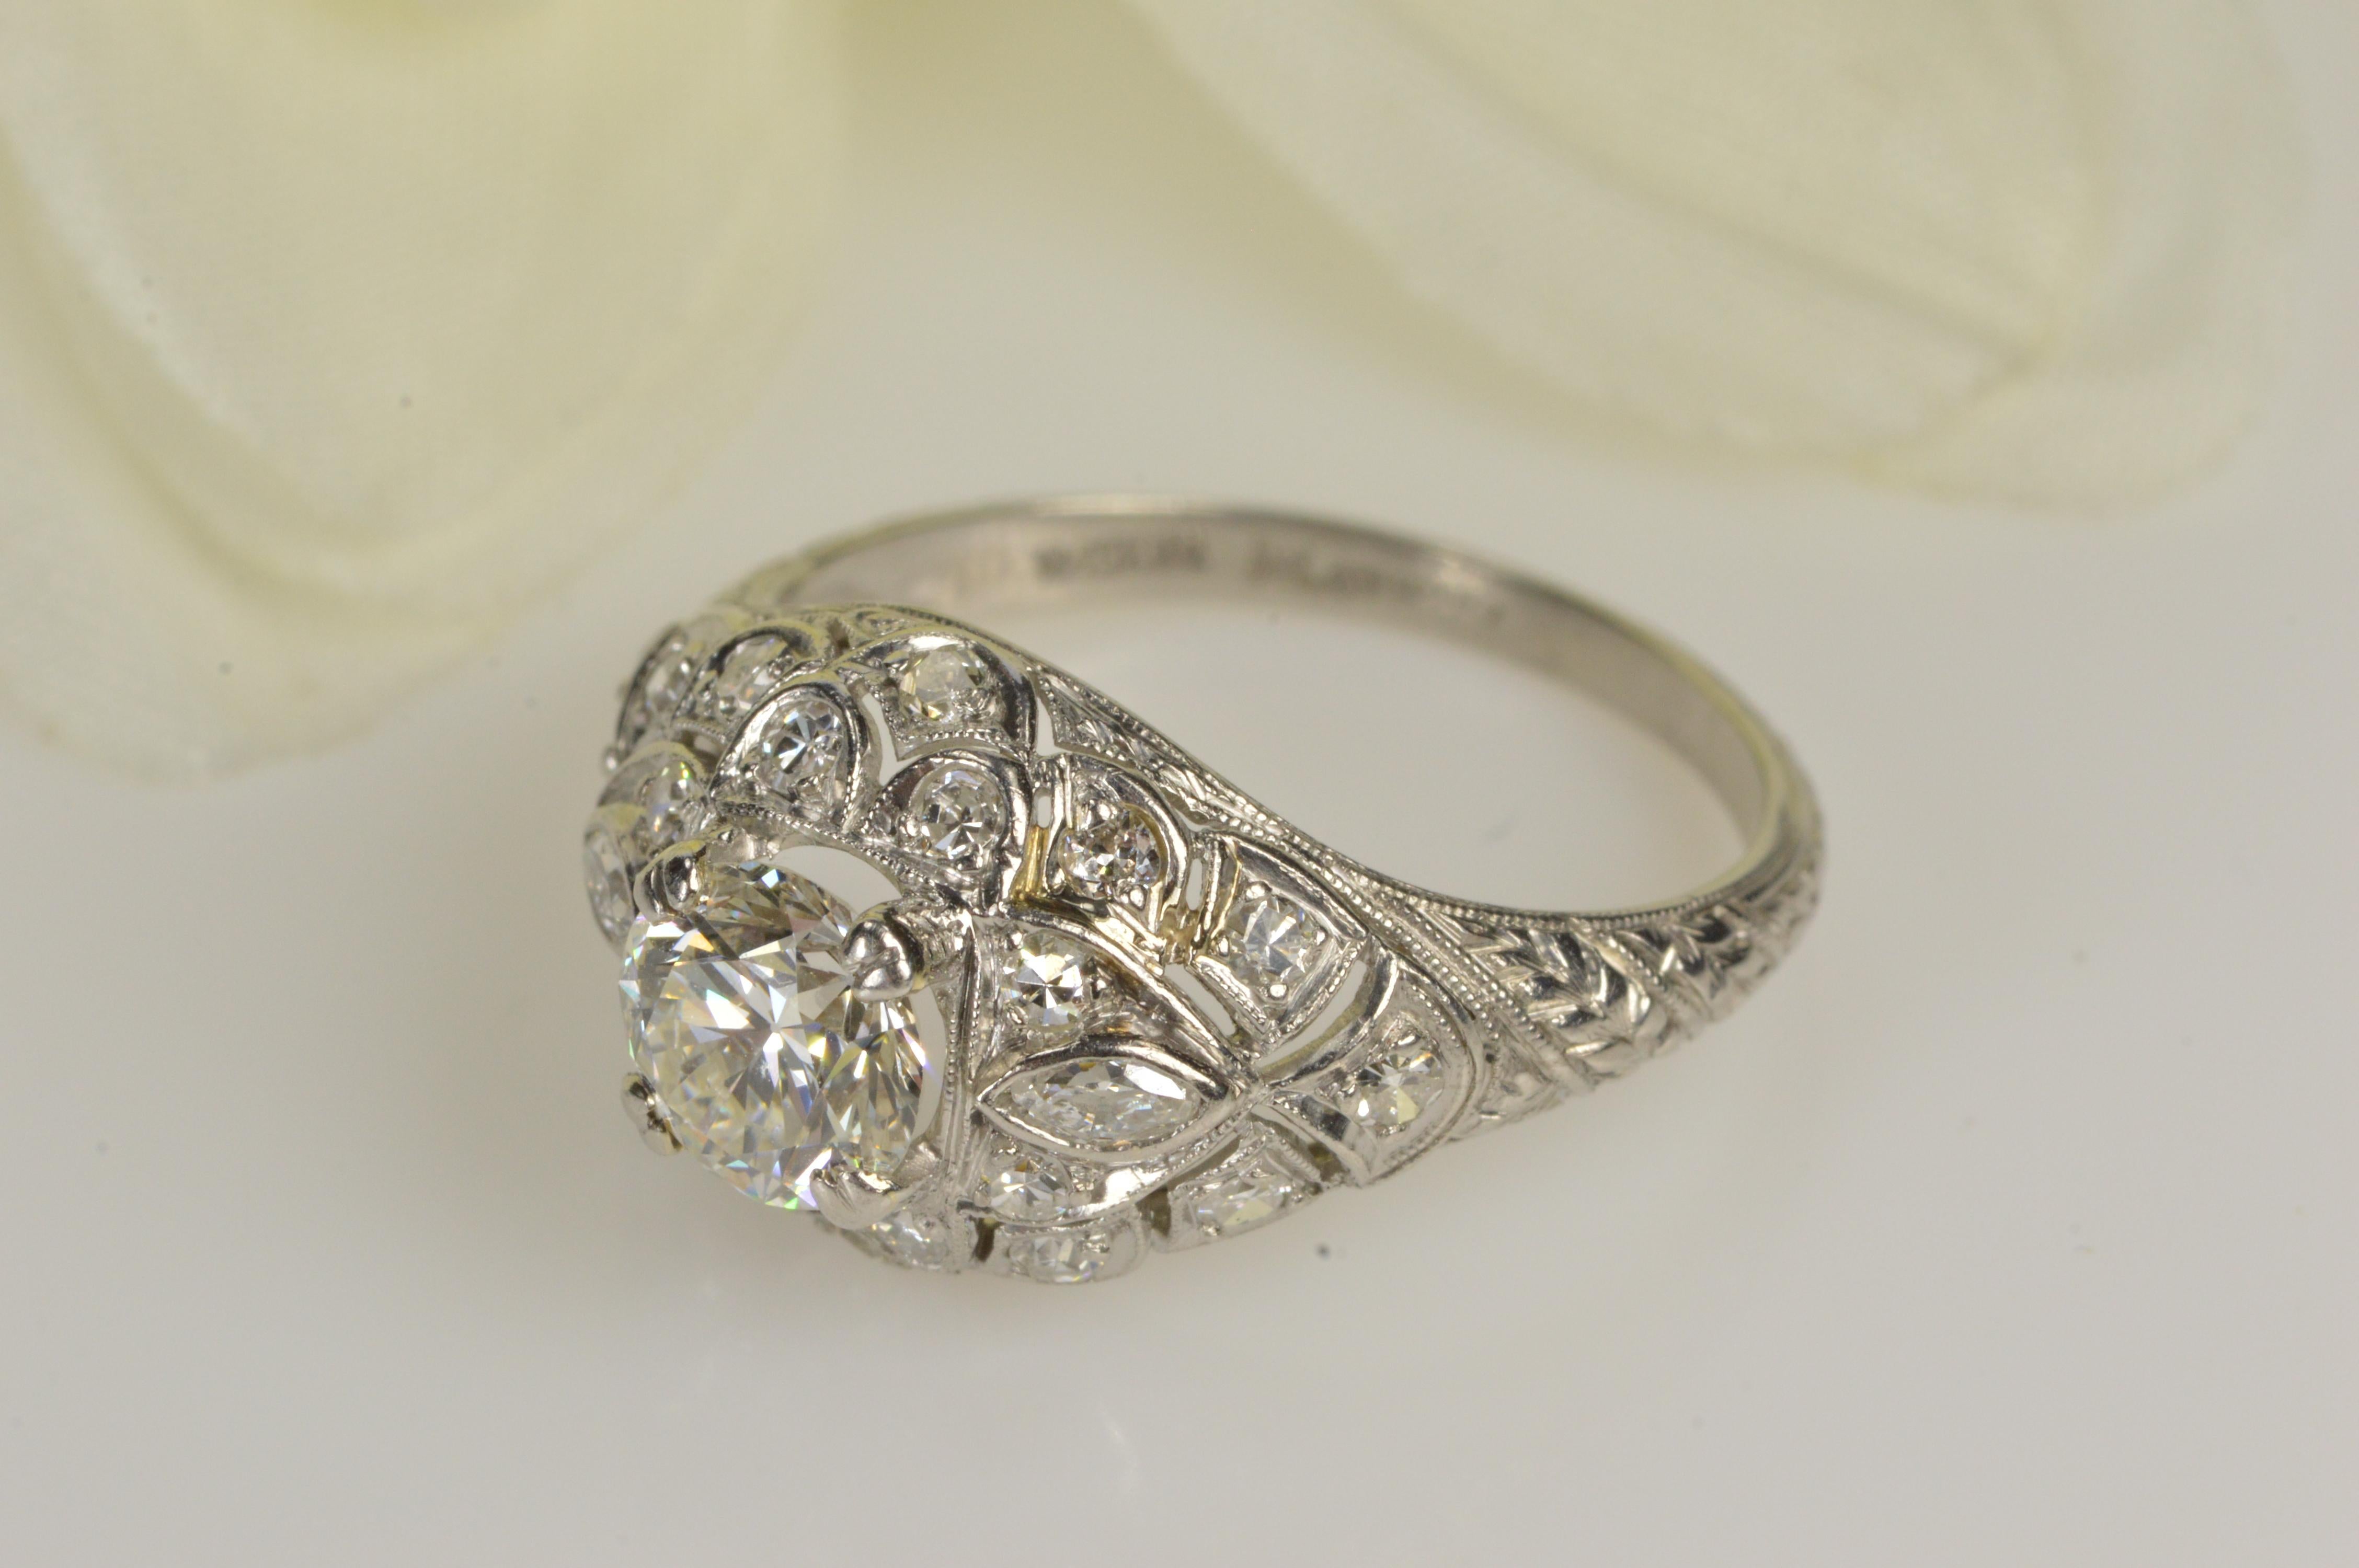 This beautufil Diamond Art Deco Engagement Ring is adourned with 1.30 carat total weight with the center stone at almost 1 carat of diamonds with few inclusions. The ring is platinum weighing 4.3 grams and is currently a size 6 but can easily be